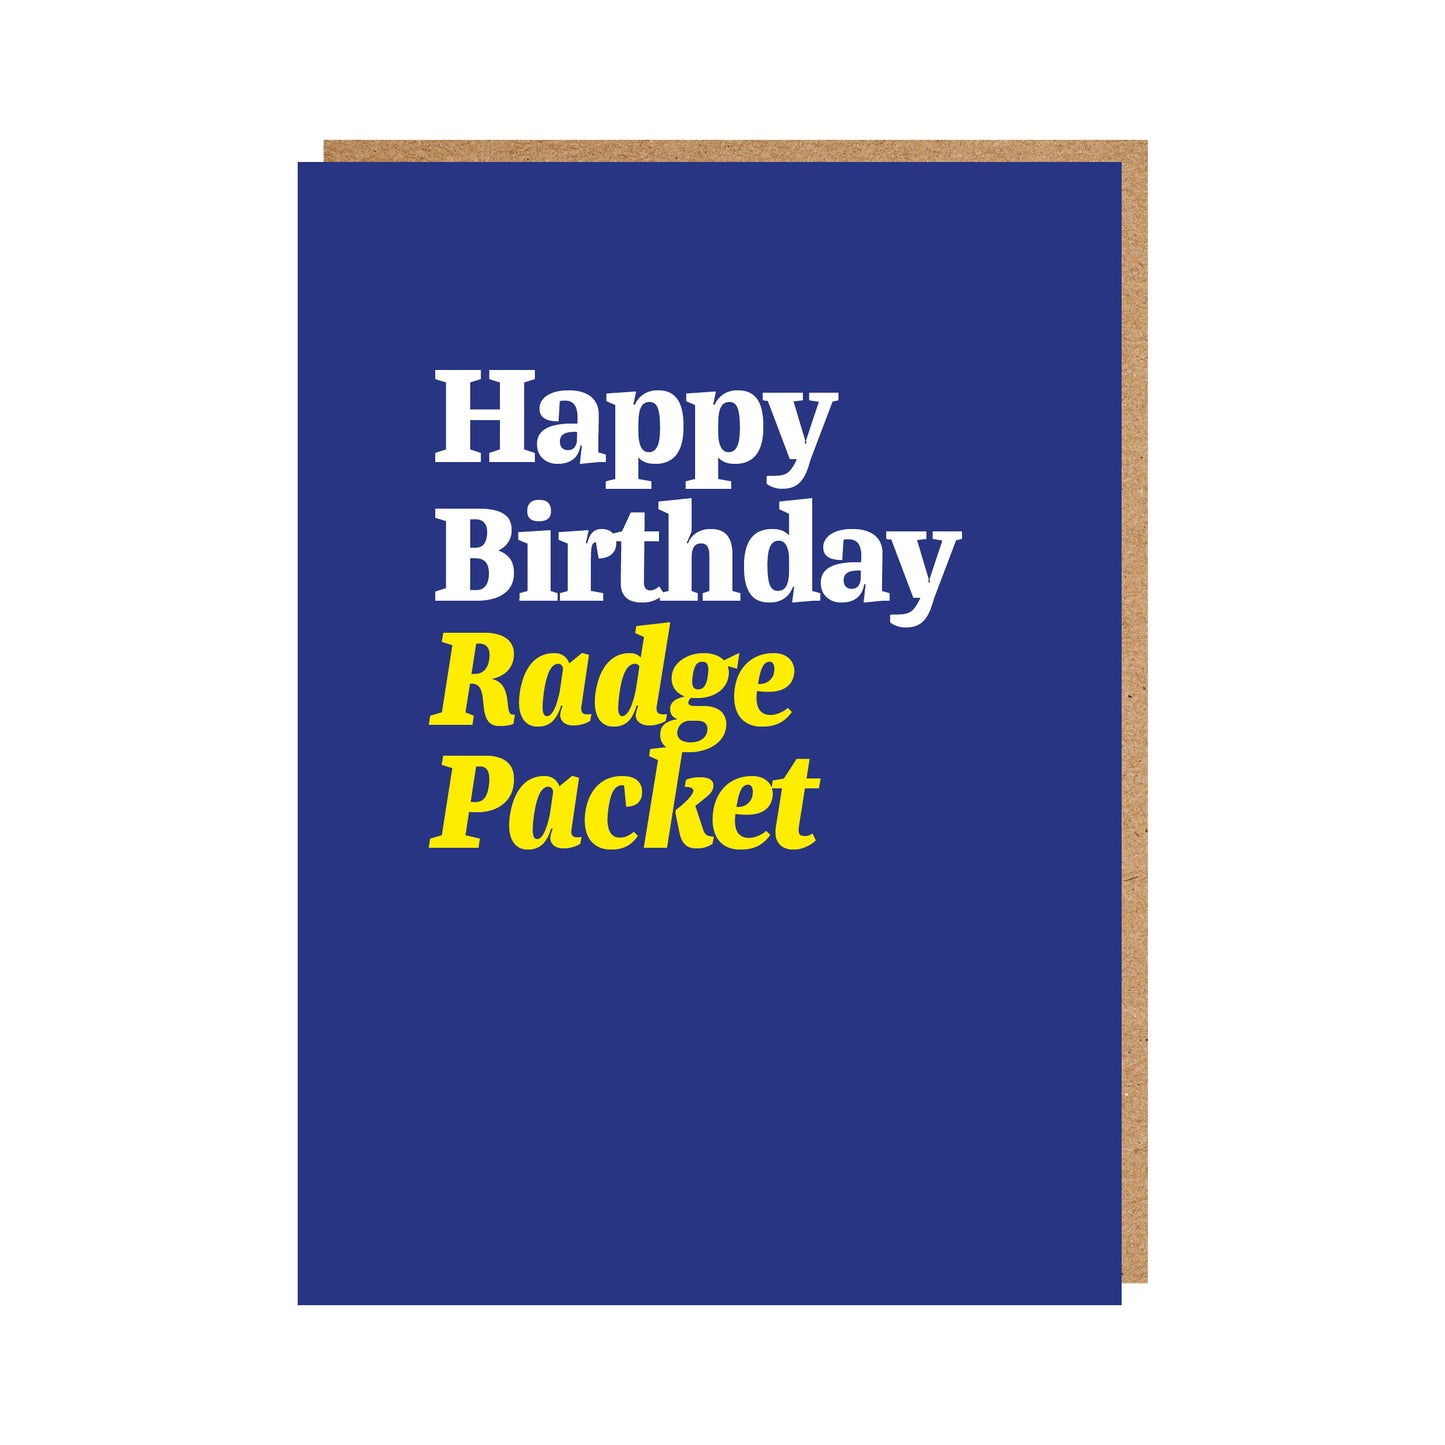 Geordie Birthday Card with text reading "Happy Birthday Radge Packet"